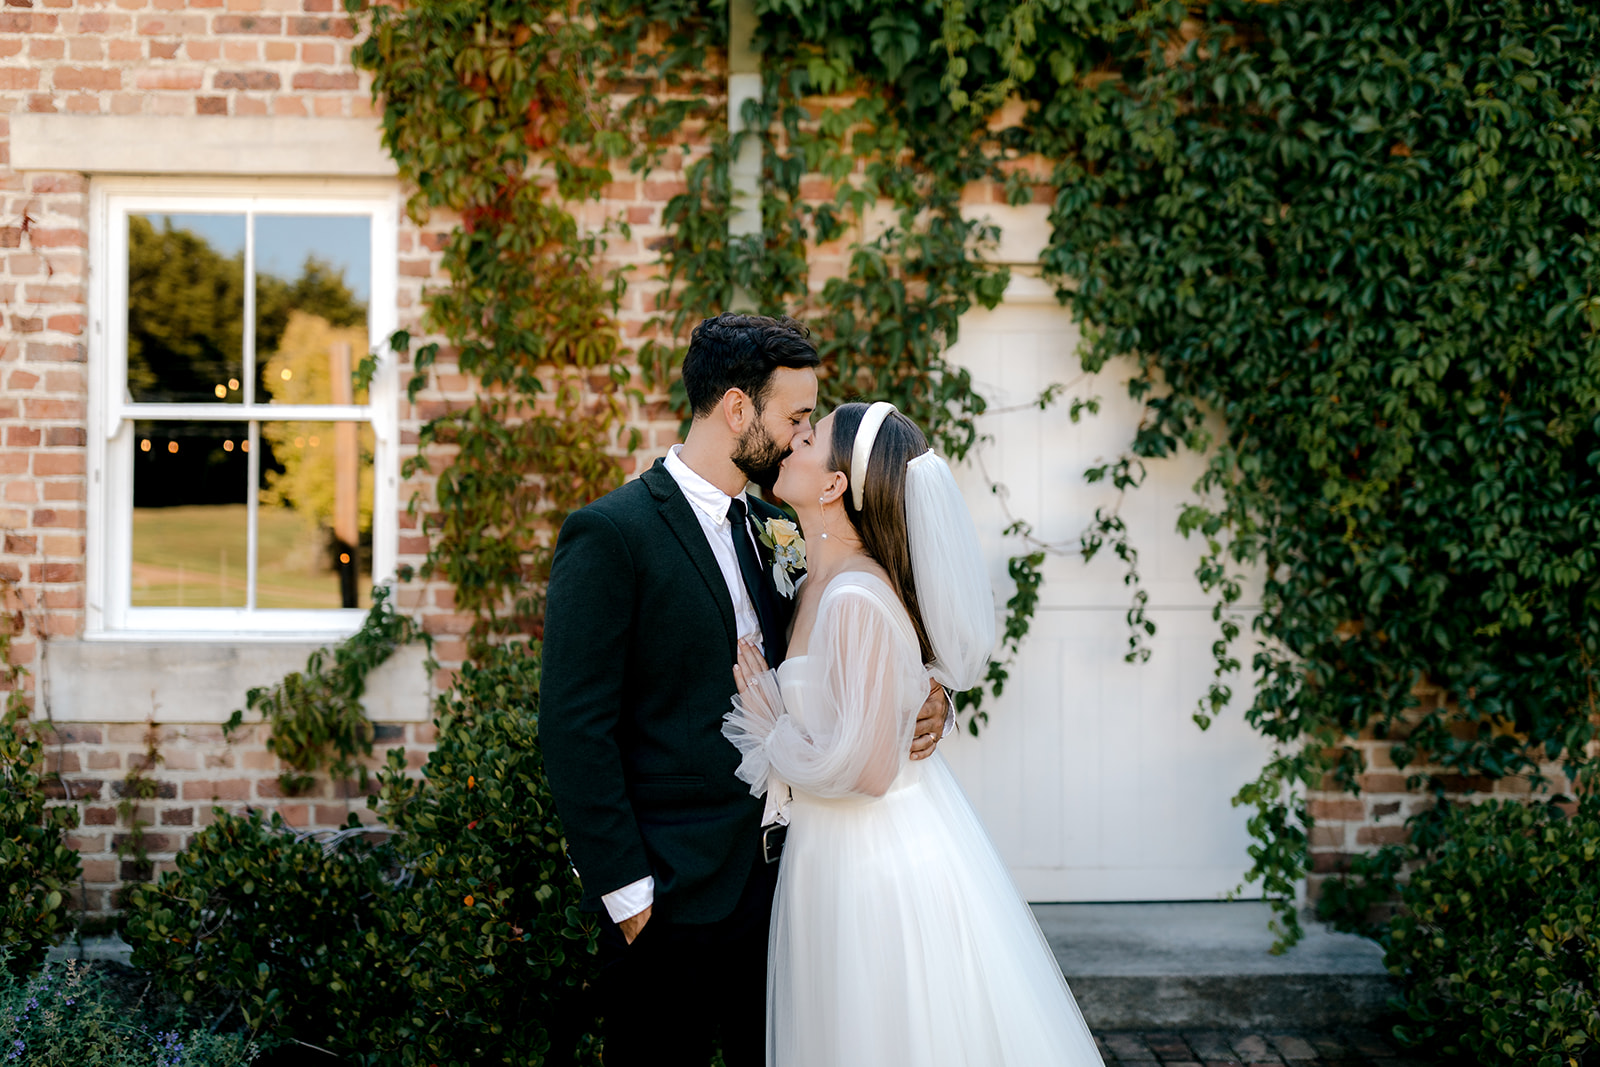 Portrait of bride & groom kissing in front of heritage venue at their elegant country wedding.